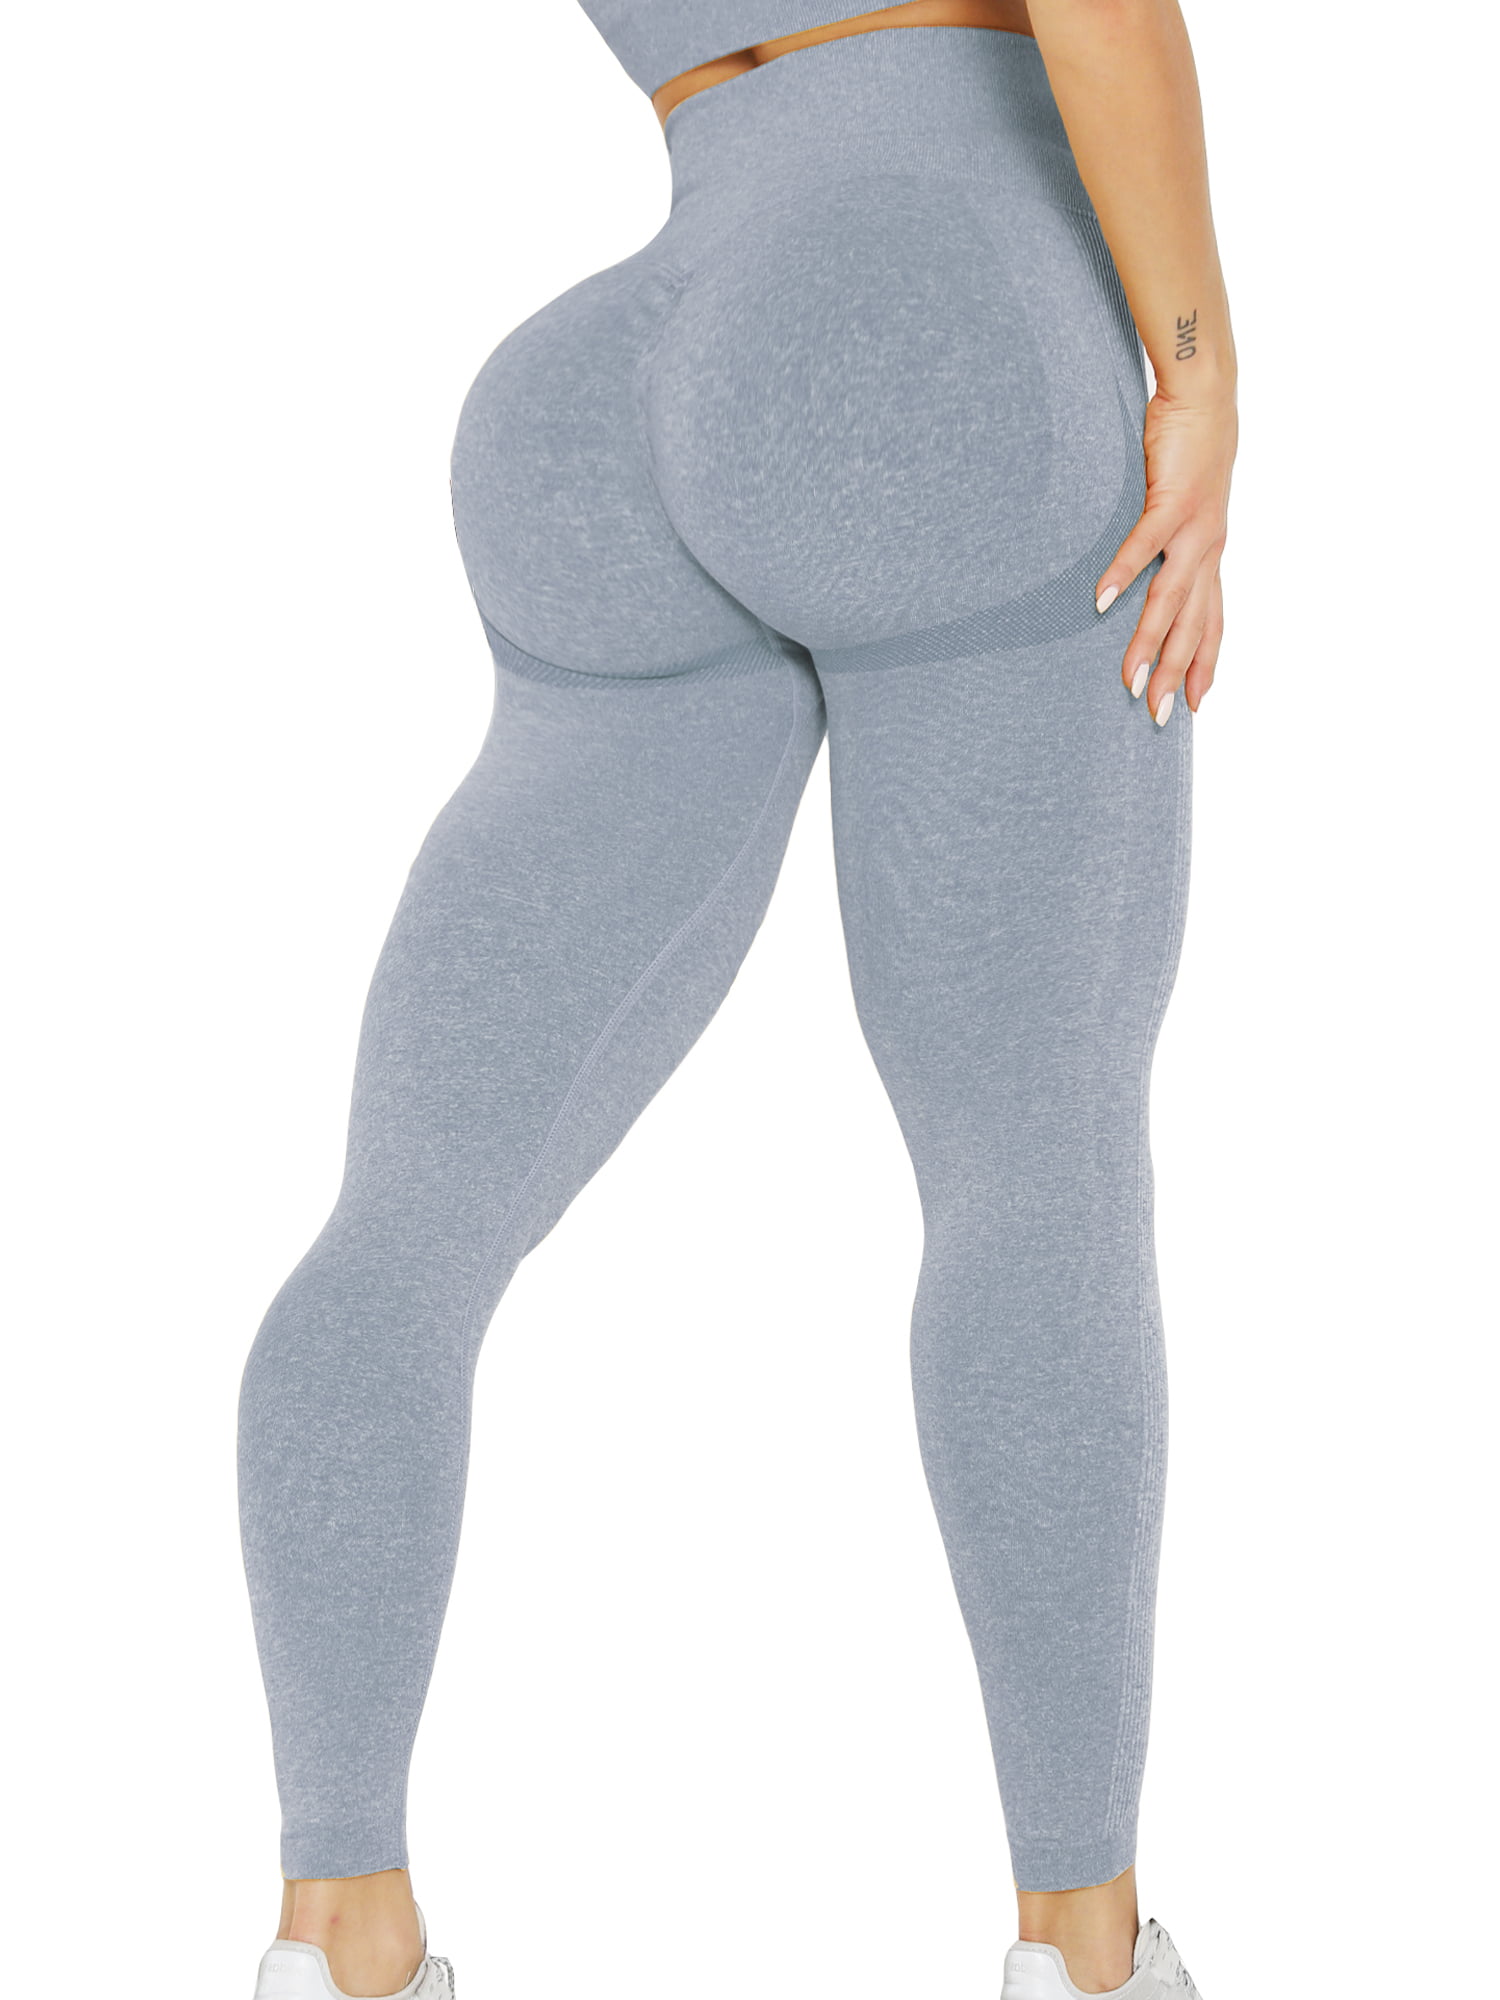 Leggings For Women Butt Lift High Waisted Tummy Control No See-Through Yoga  Pants Workout Running Leggings